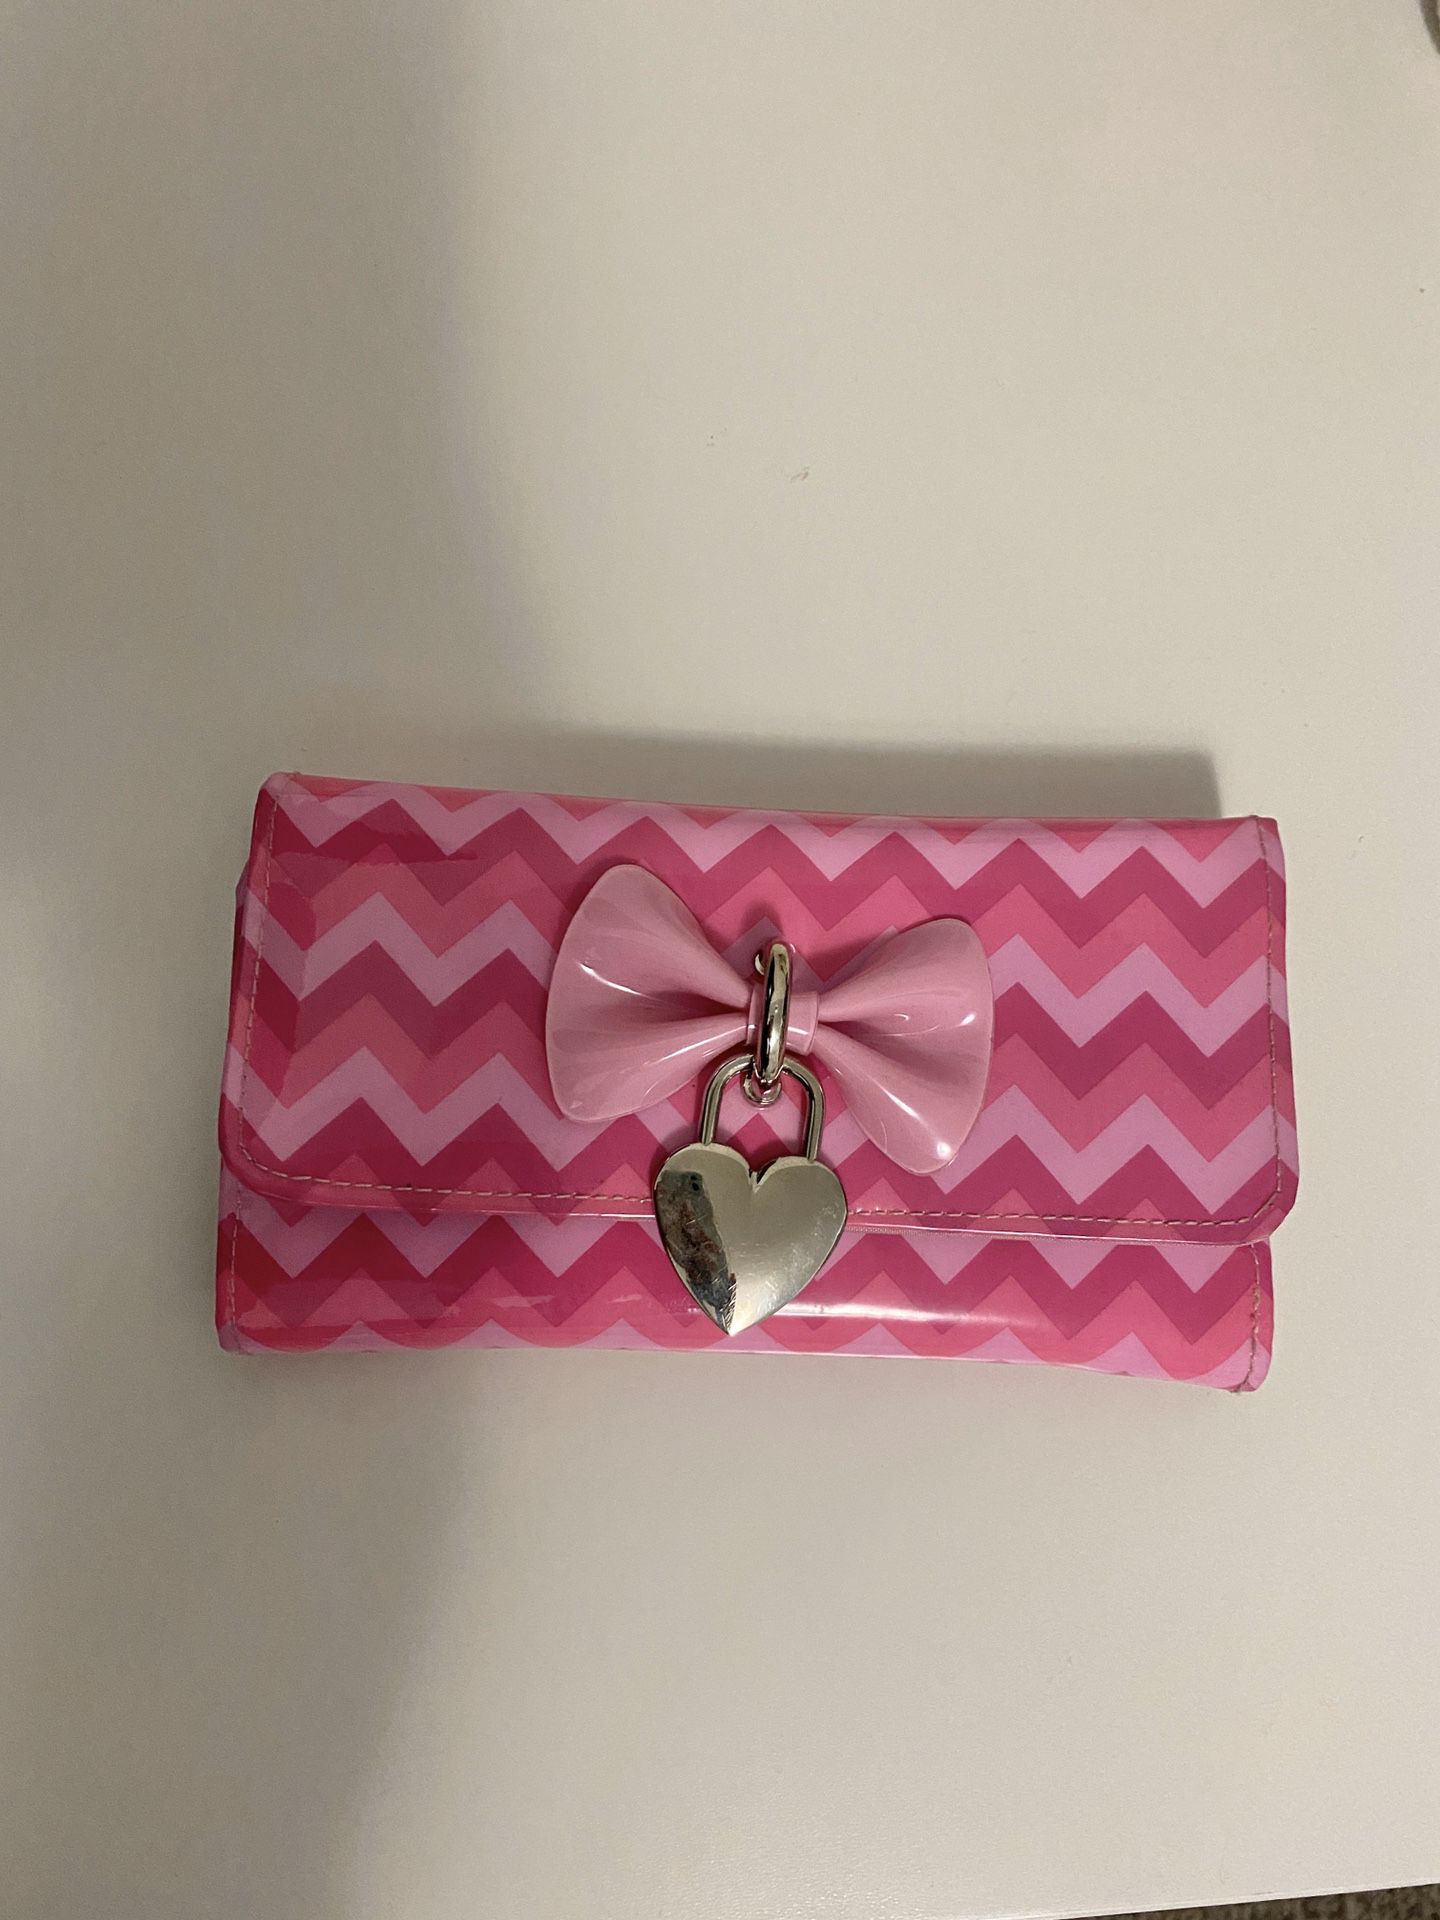 Pink Chevron Wallet from Claire’s